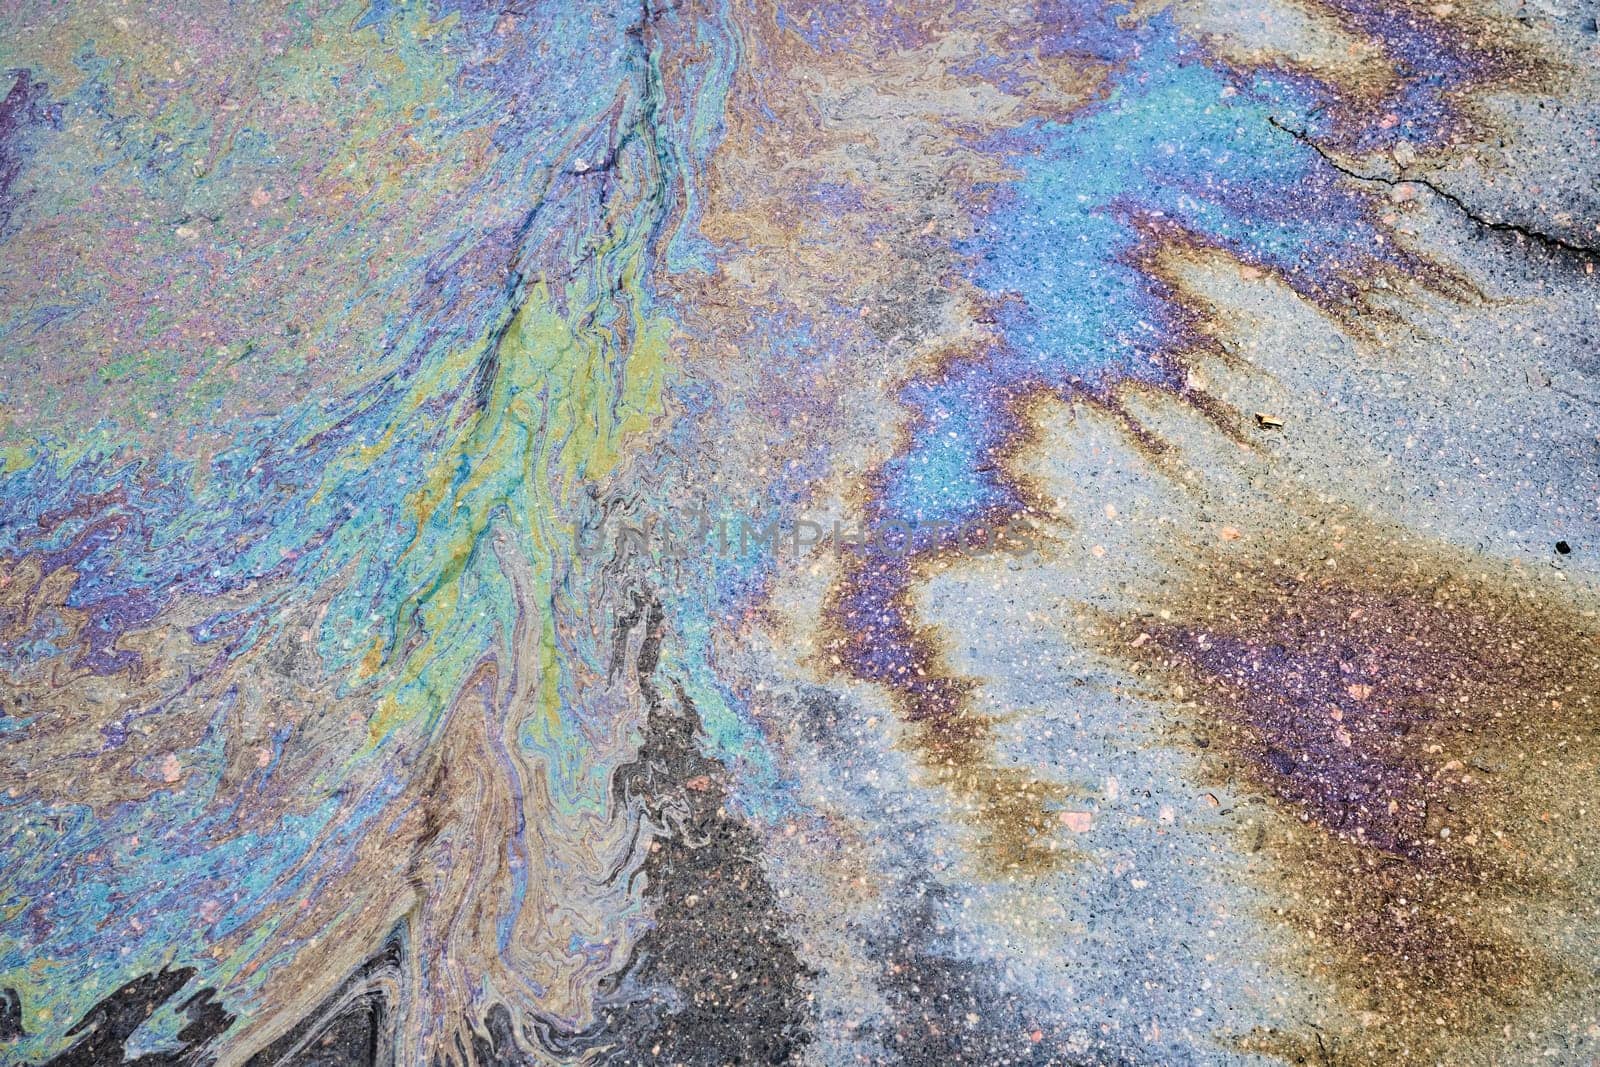 The vibrant texture of a petrol oil spill on a wet pavement